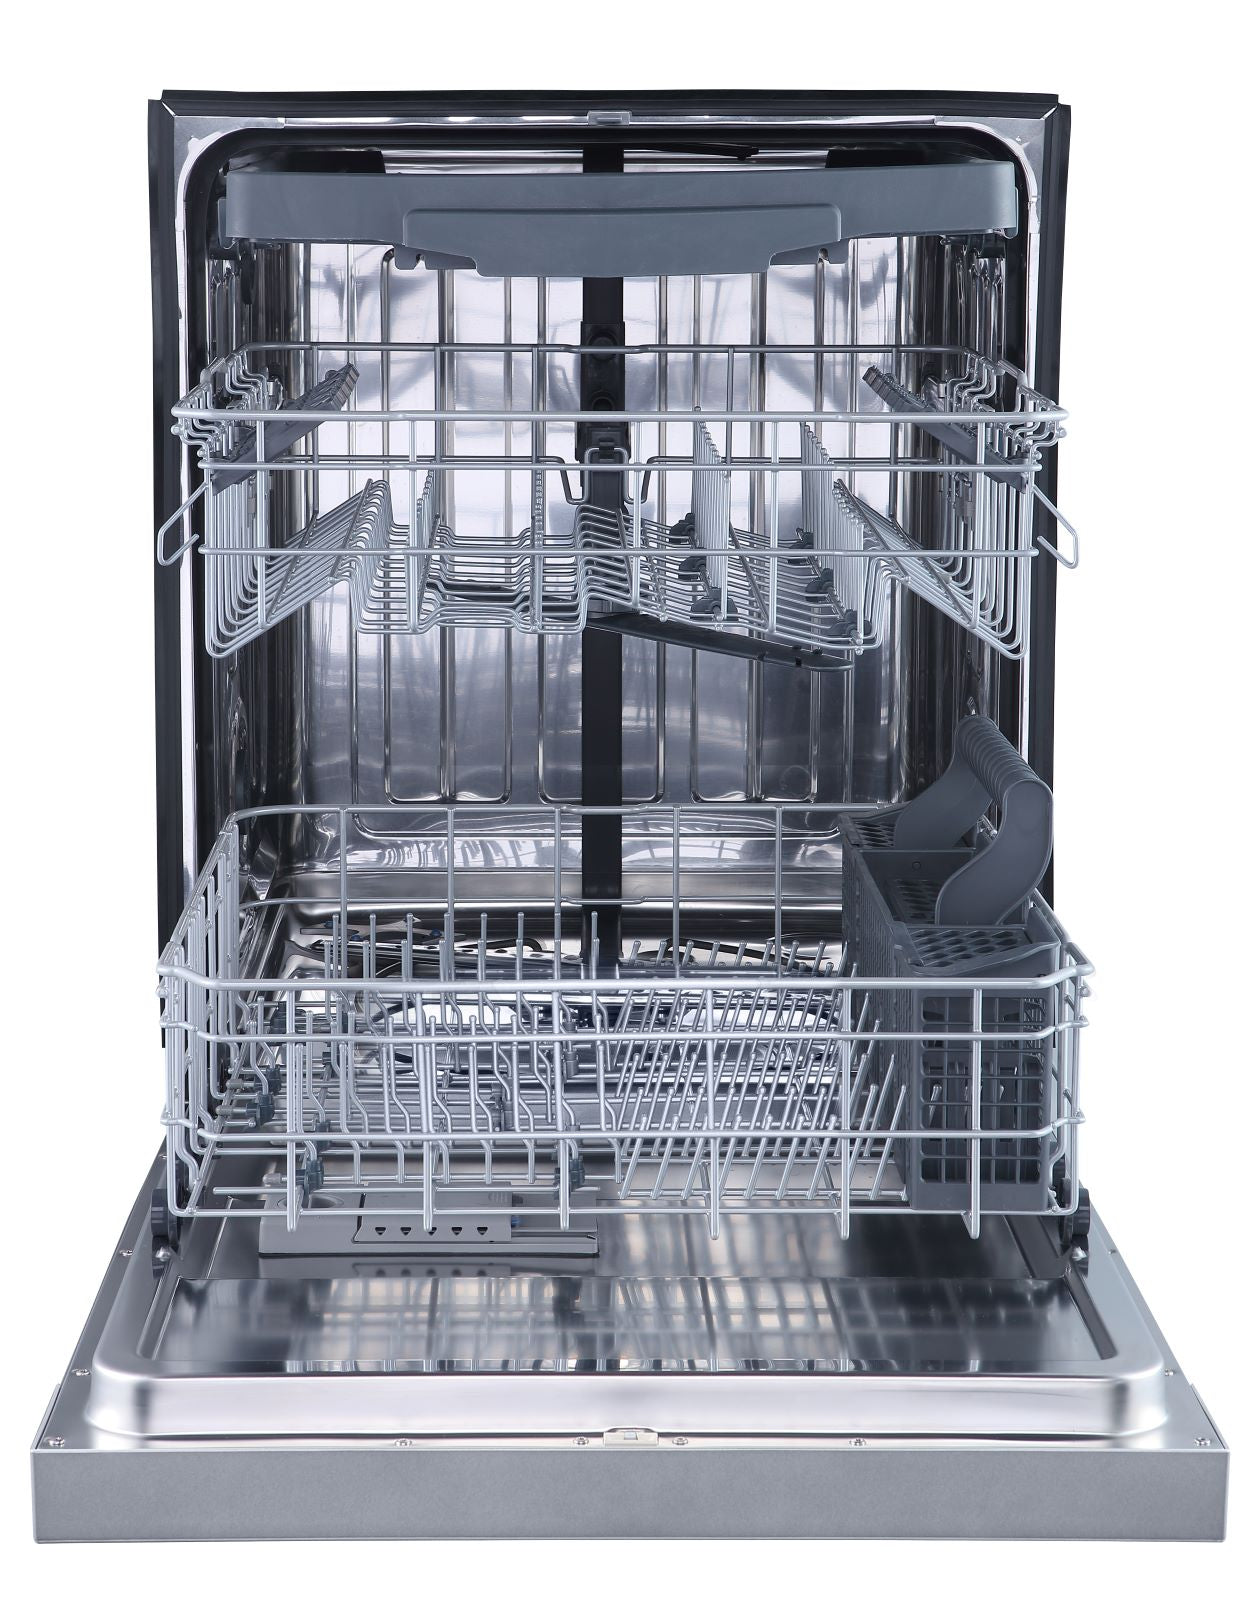 GE Stainless Steel 24" Built-In Front Control Dishwasher - GBF655SSPSS